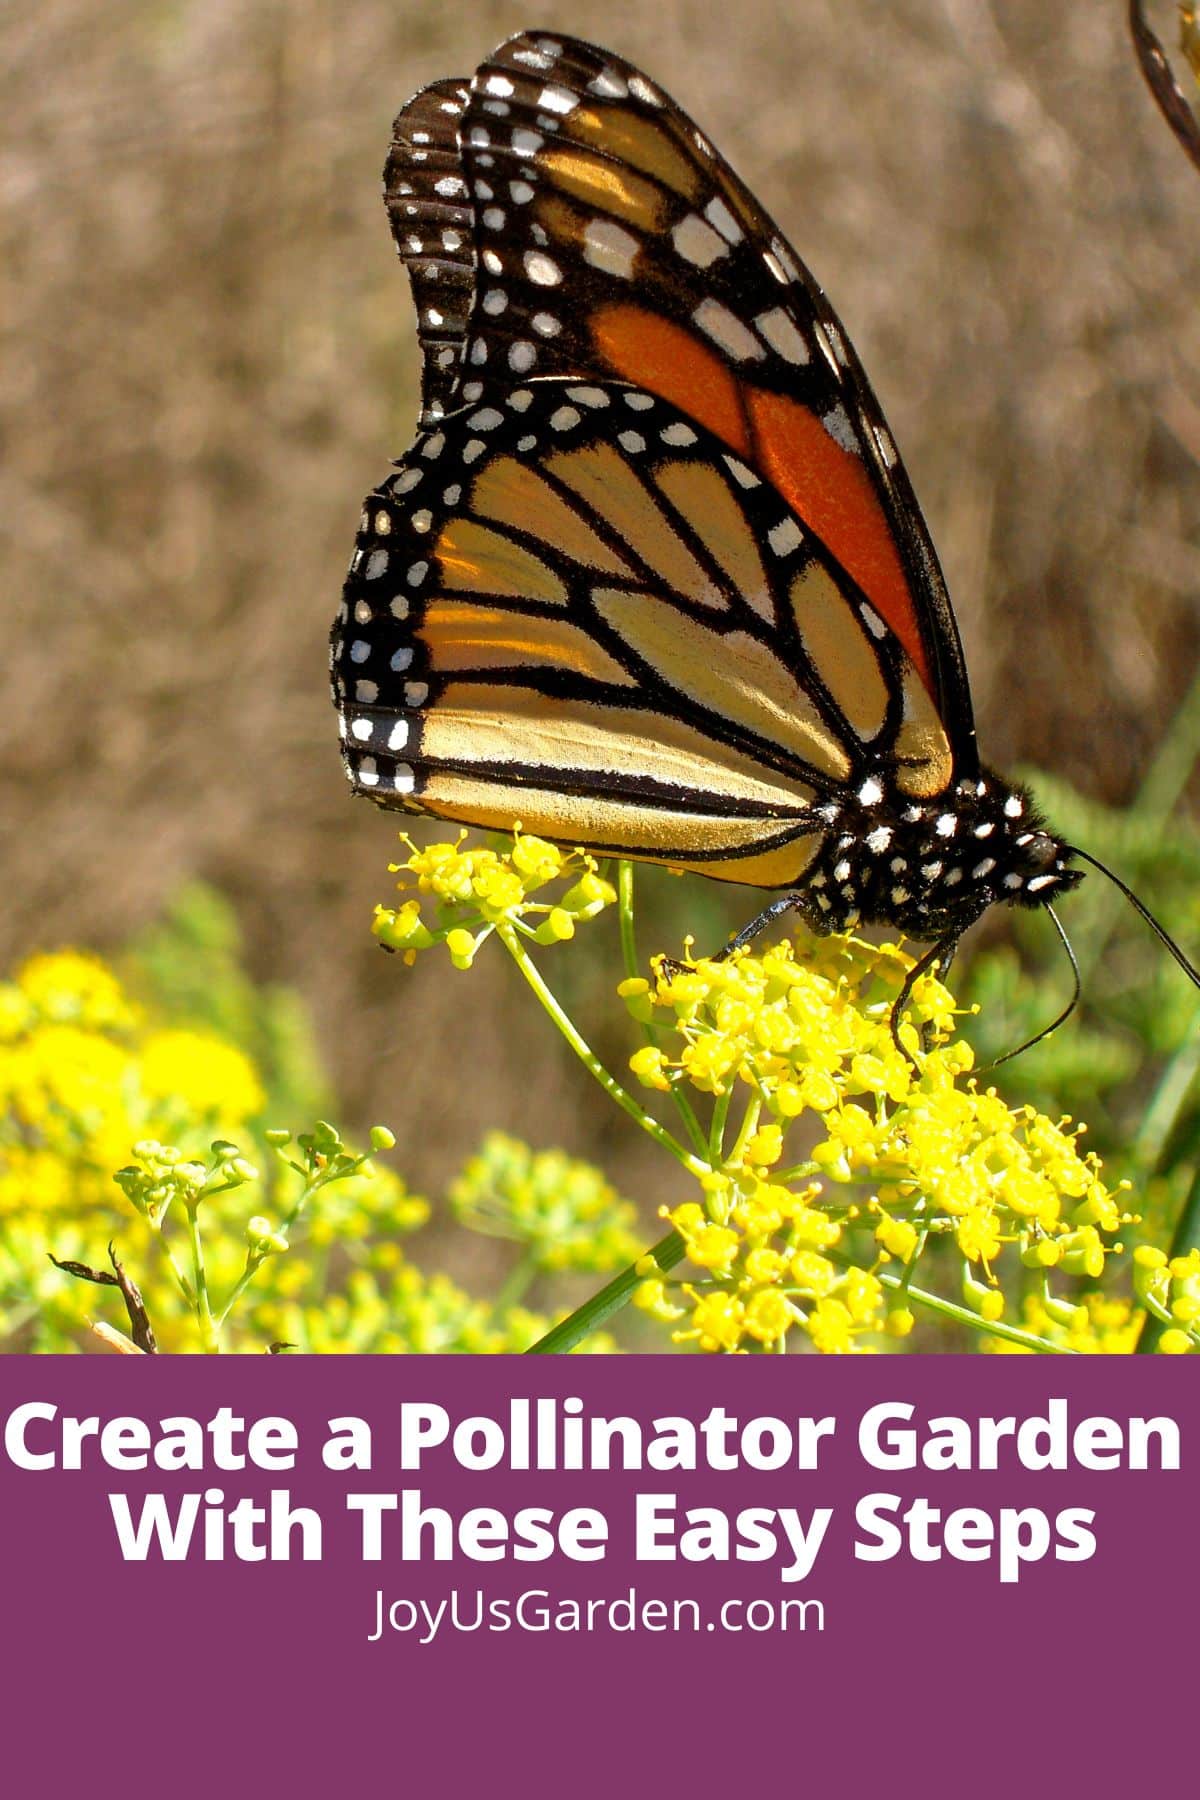 Lead photo of monarch butterfly on yellow flowers, text reads create a pollinator garden with these easy steps joyusgarden.com